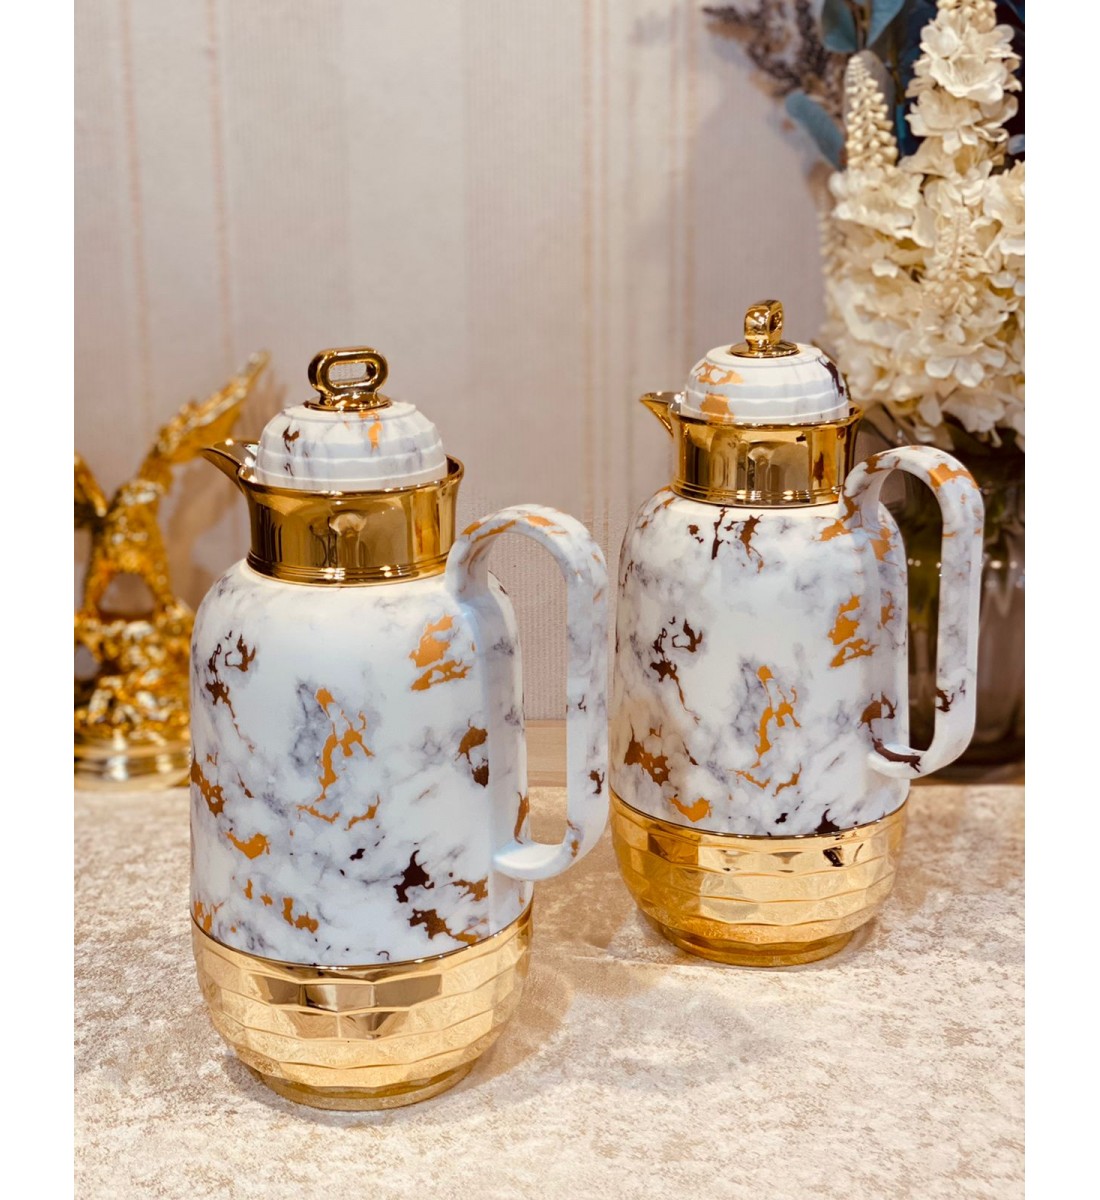 Lana thermos set - 2 white and golden marble pieces